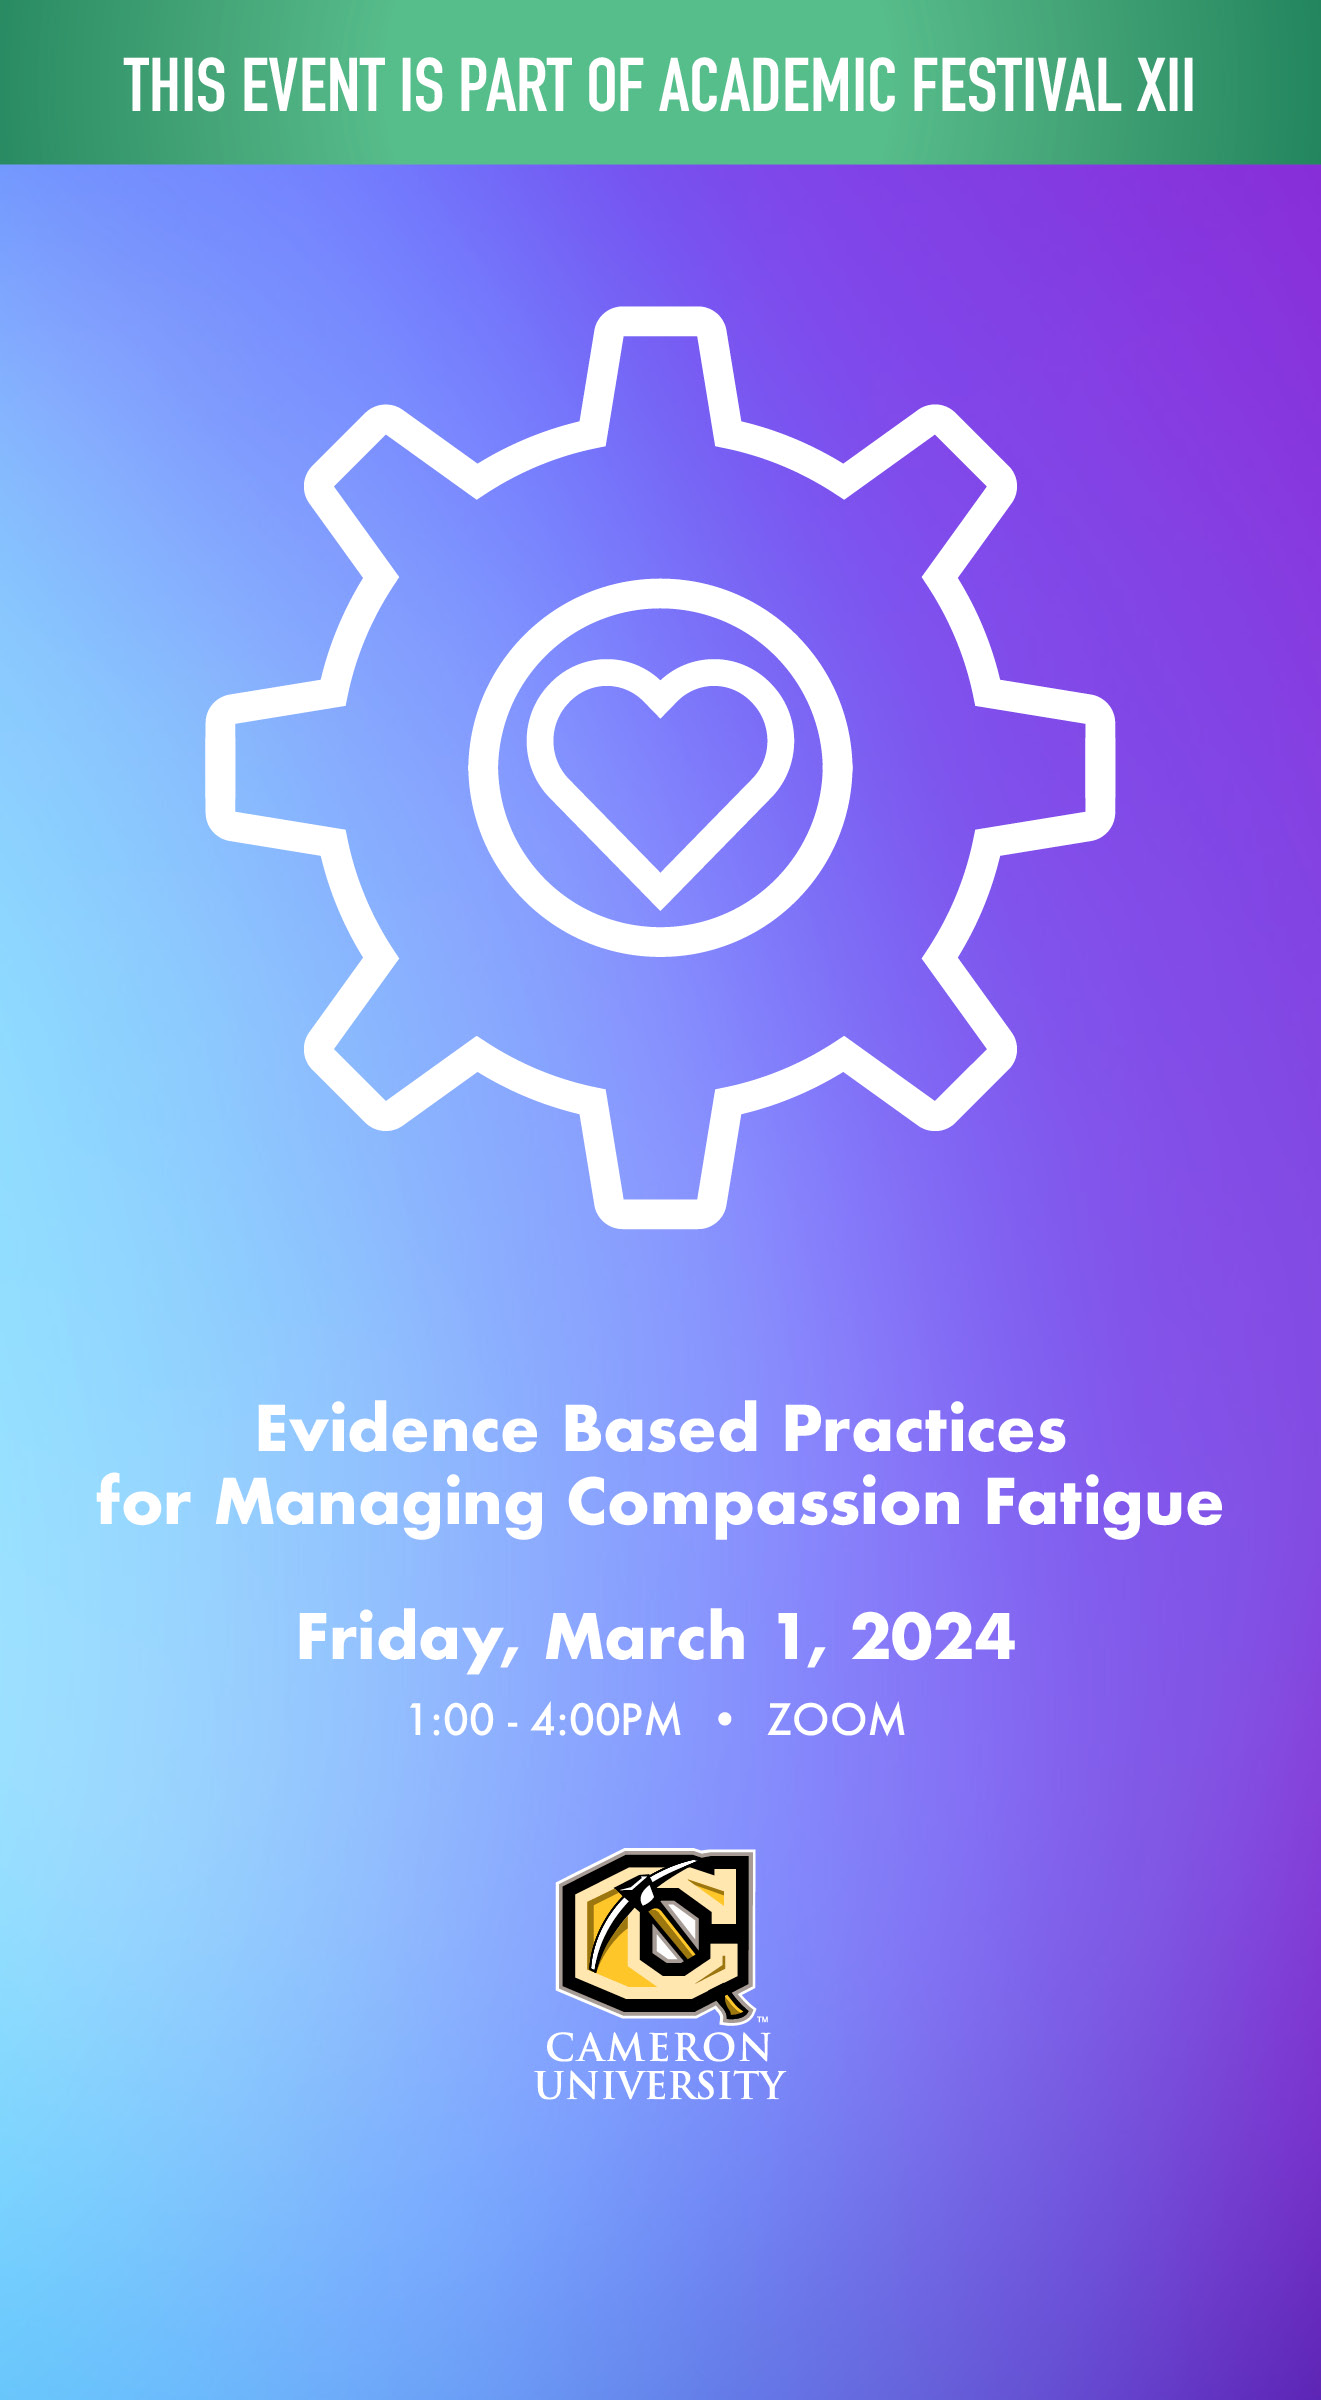 This event is part of Academic Festival XII
“Evidence Based Practices for Managing Compassion Fatigue”
Friday, March 1, 2024
1 - 4 p.m. - Zoom
Cameron University